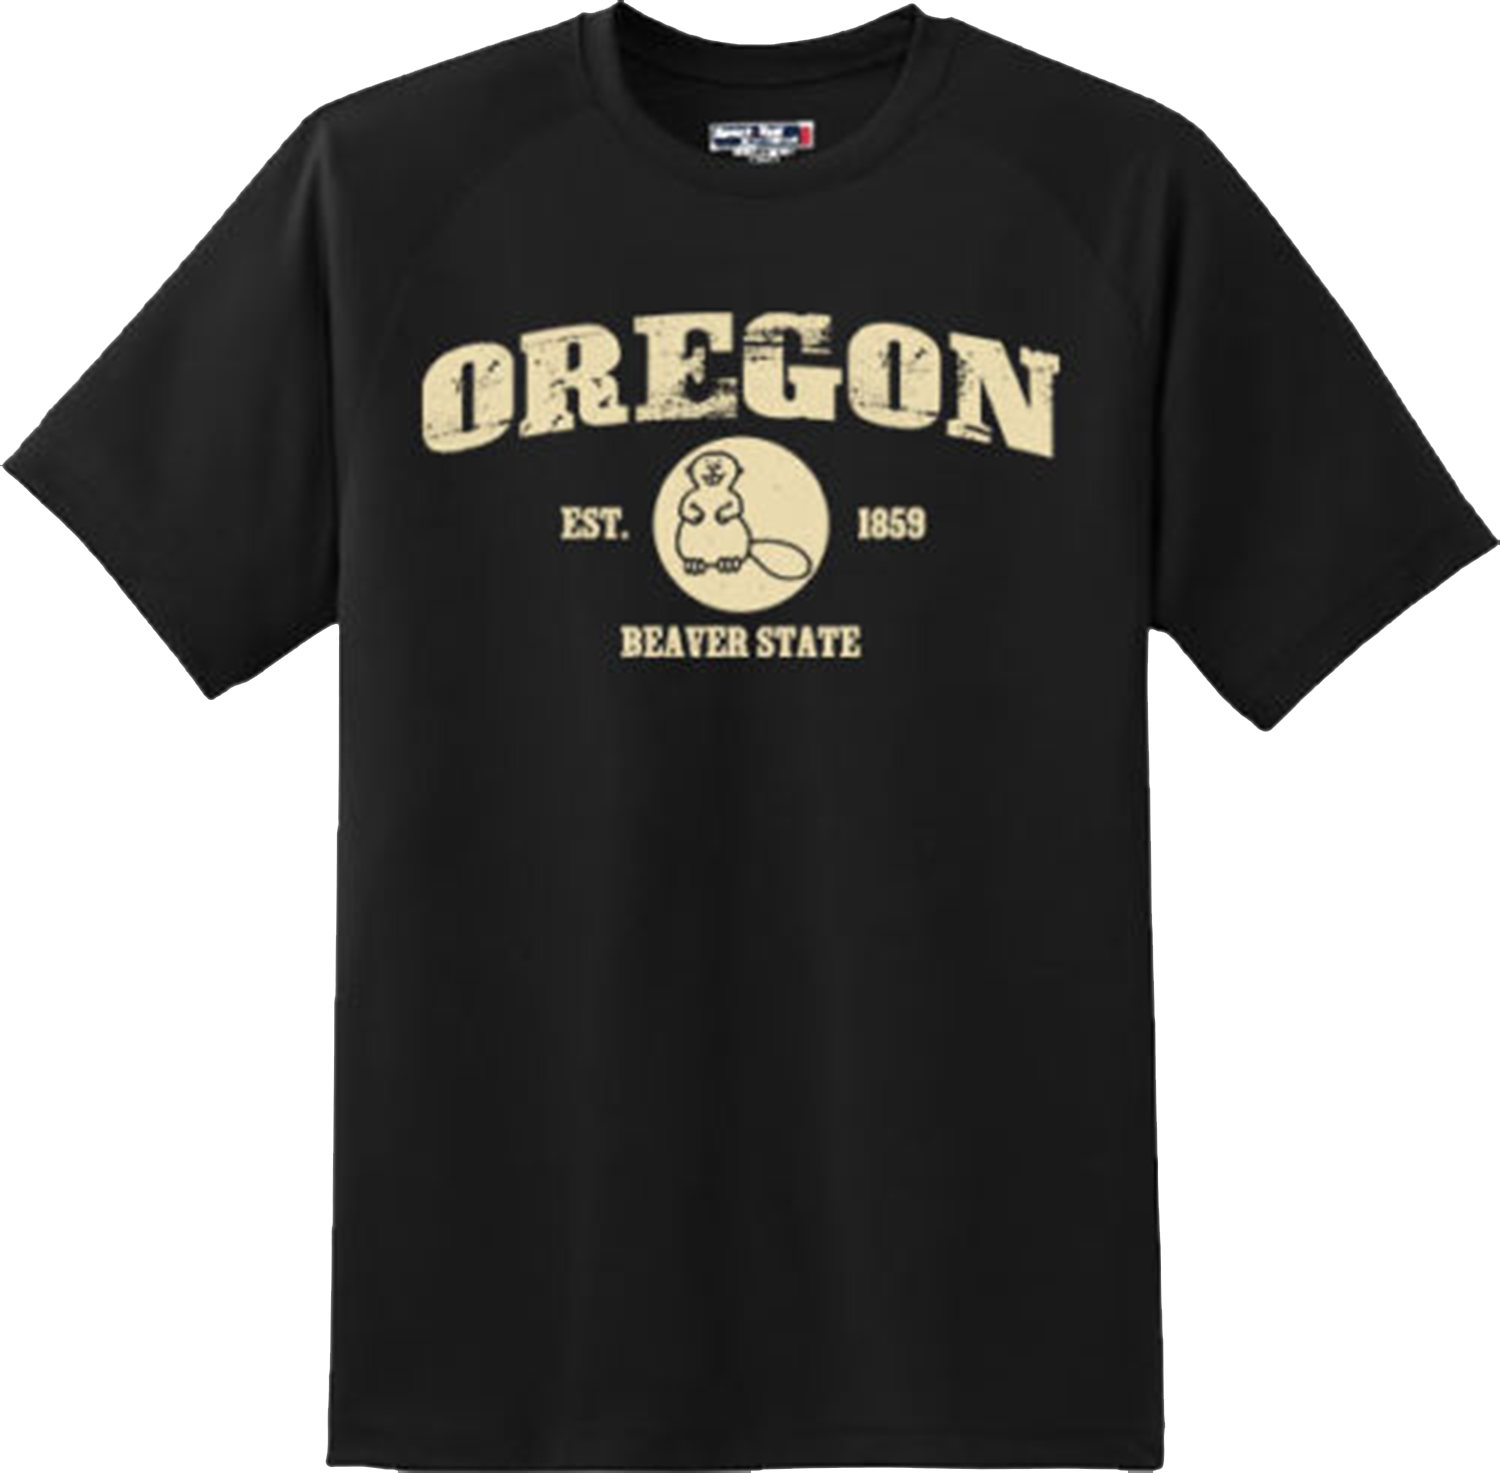 Oregon State Vintage Retro Hometown America Gift T Shirt New Graphic Tee